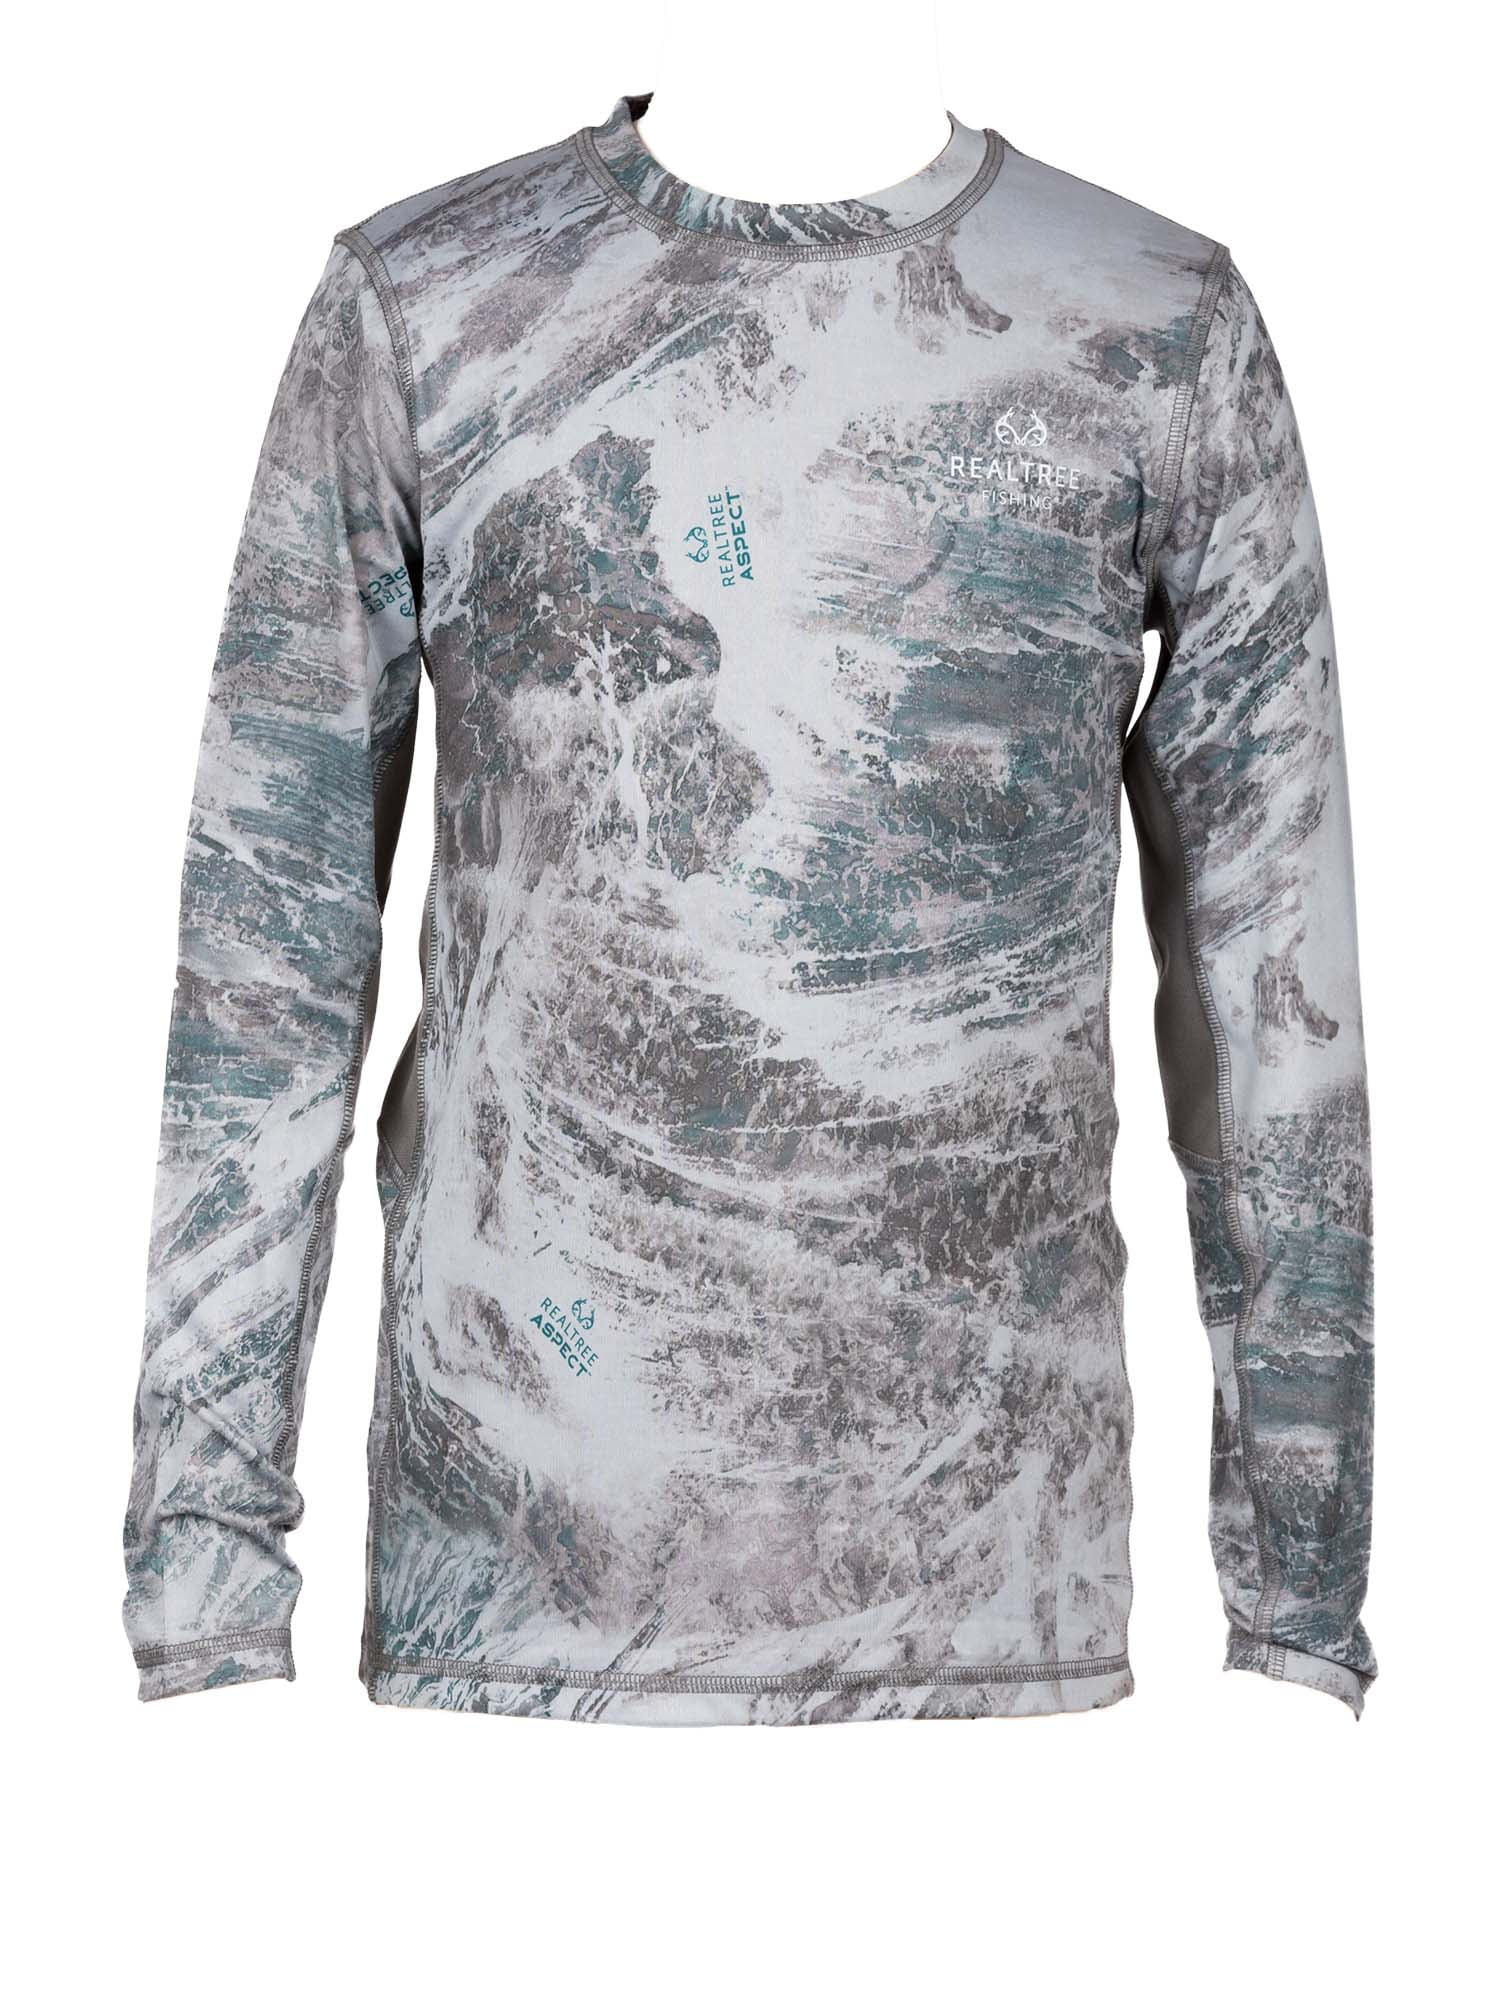 Realtree Aspect Youth Long Sleeve Reversible Fishing Shirt, Size: Small, Multicolor